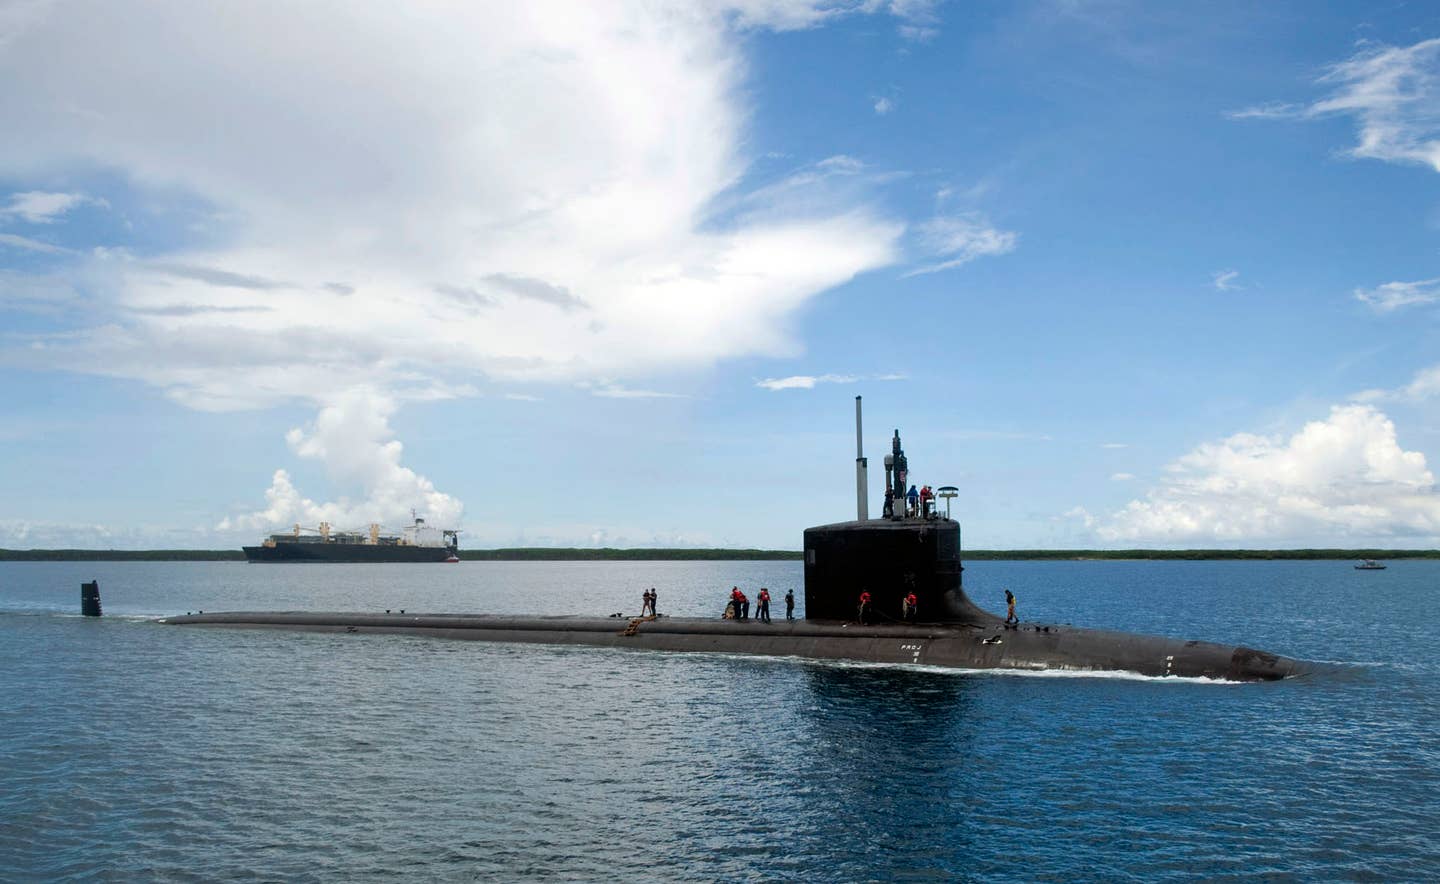 The Virginia-class attack submarine USS Hawaii (SSN 776) enters Apra Harbor for a scheduled port visit. The Virginia-class submarines use pump-jet propulsion systems. (U.S. Navy photo by Mass Communication Specialist 2nd Class Corwin Colbert)